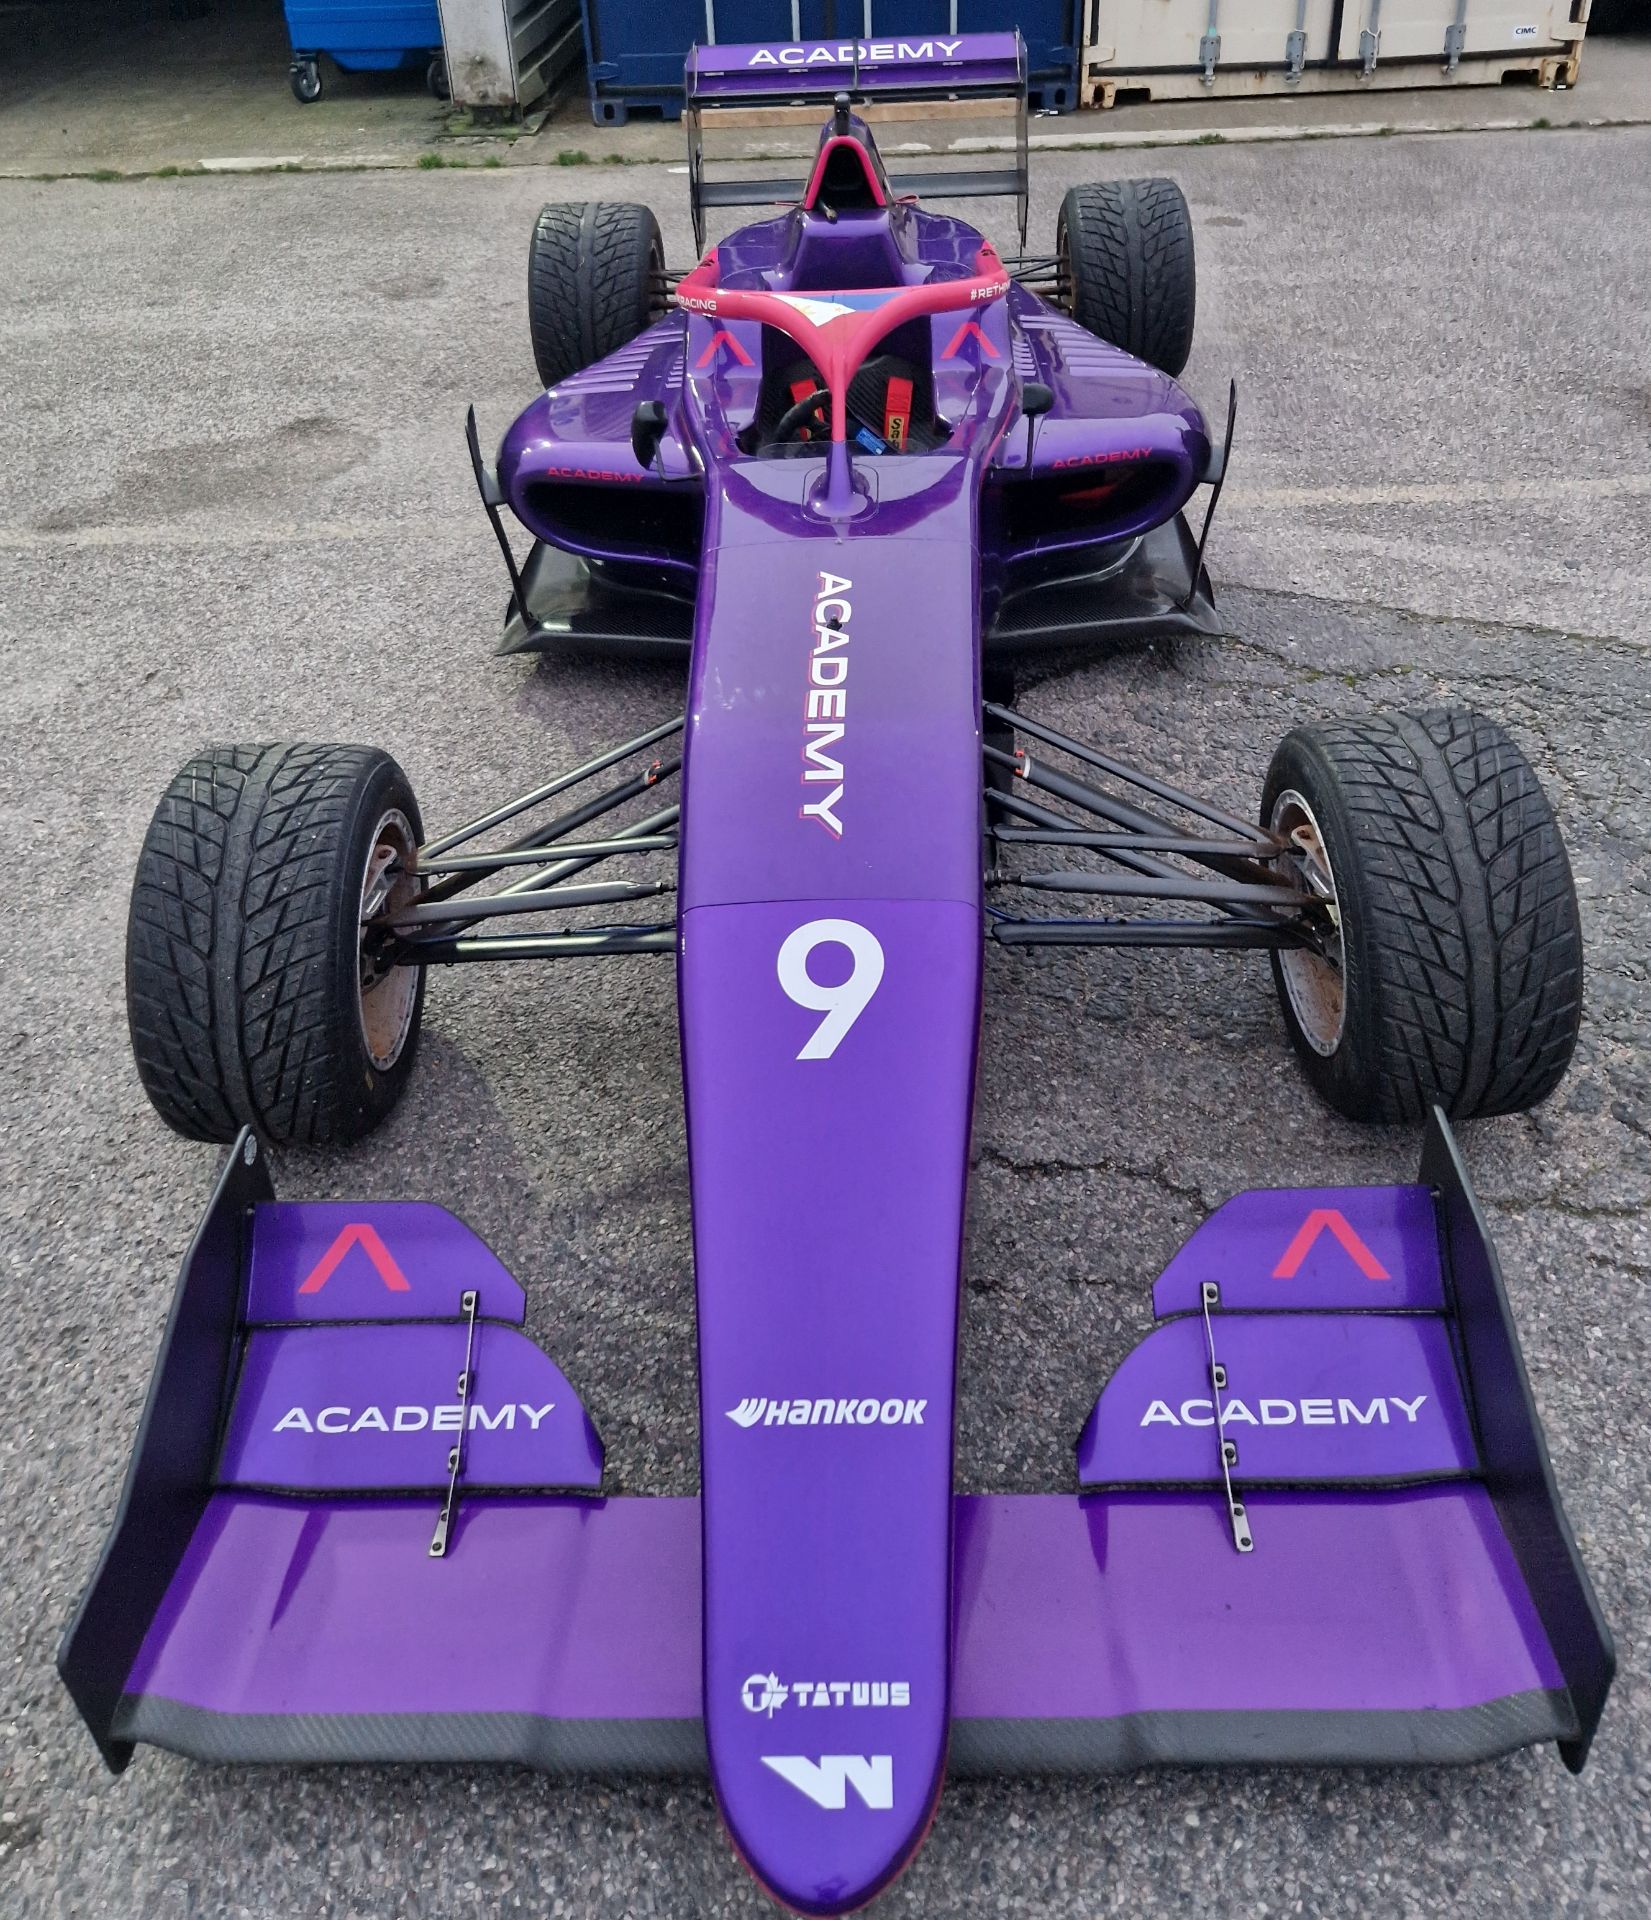 One TATUUS F3 T-318 Alfa Romeo Race Car Chassis No. 057 (2019) Finished in the W Series Academy - Bild 3 aus 10